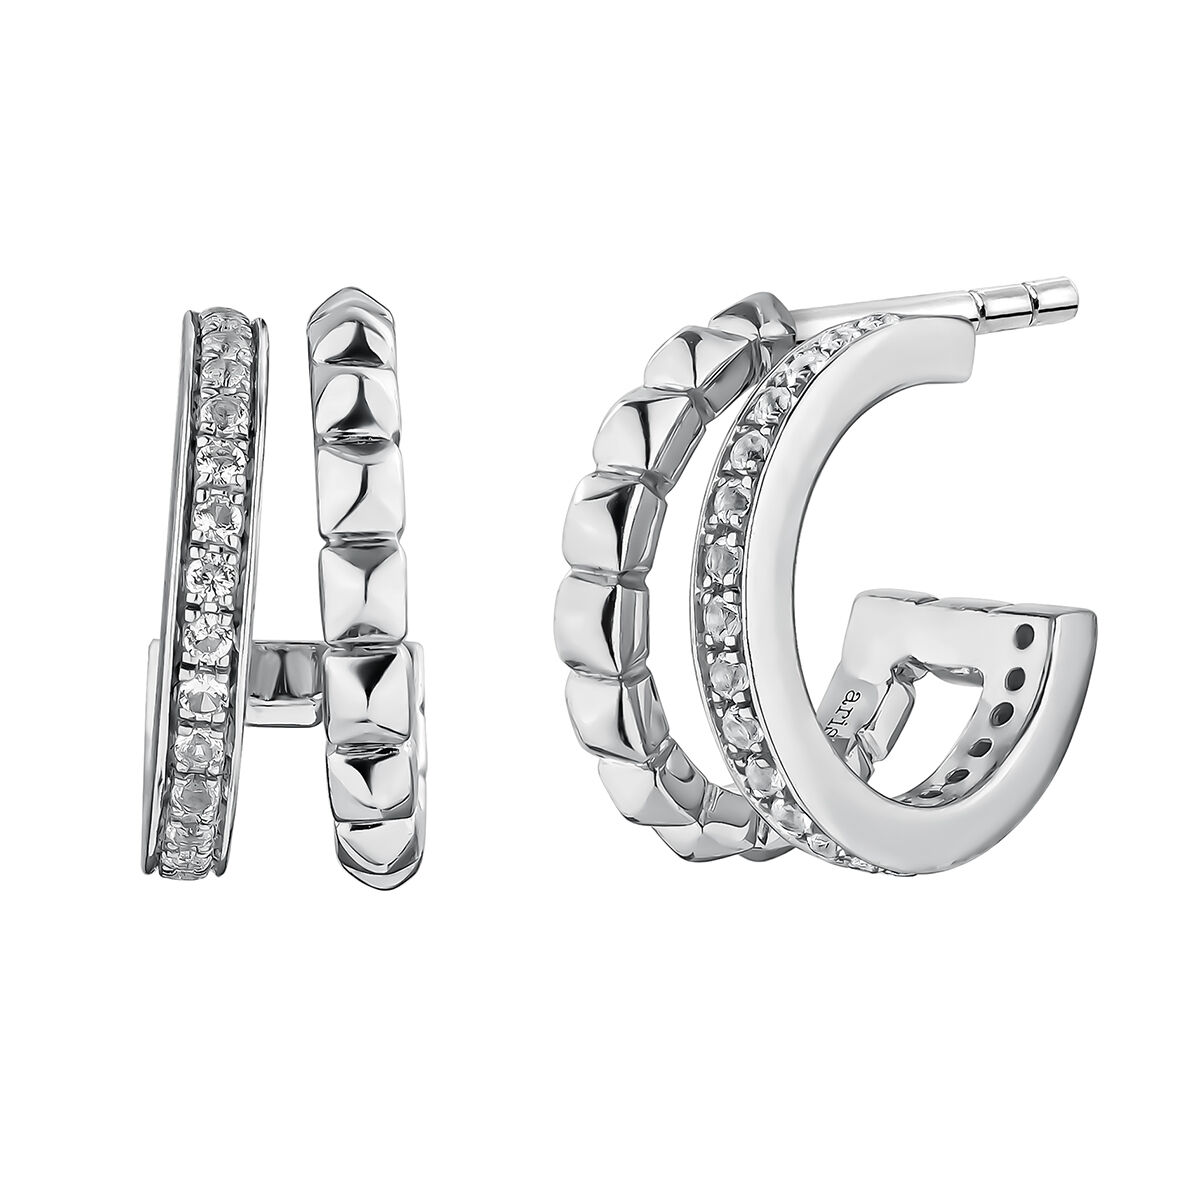 Small silver double hoop earrings with raised detail and white topaz stones, J04910-01-WT, hi-res